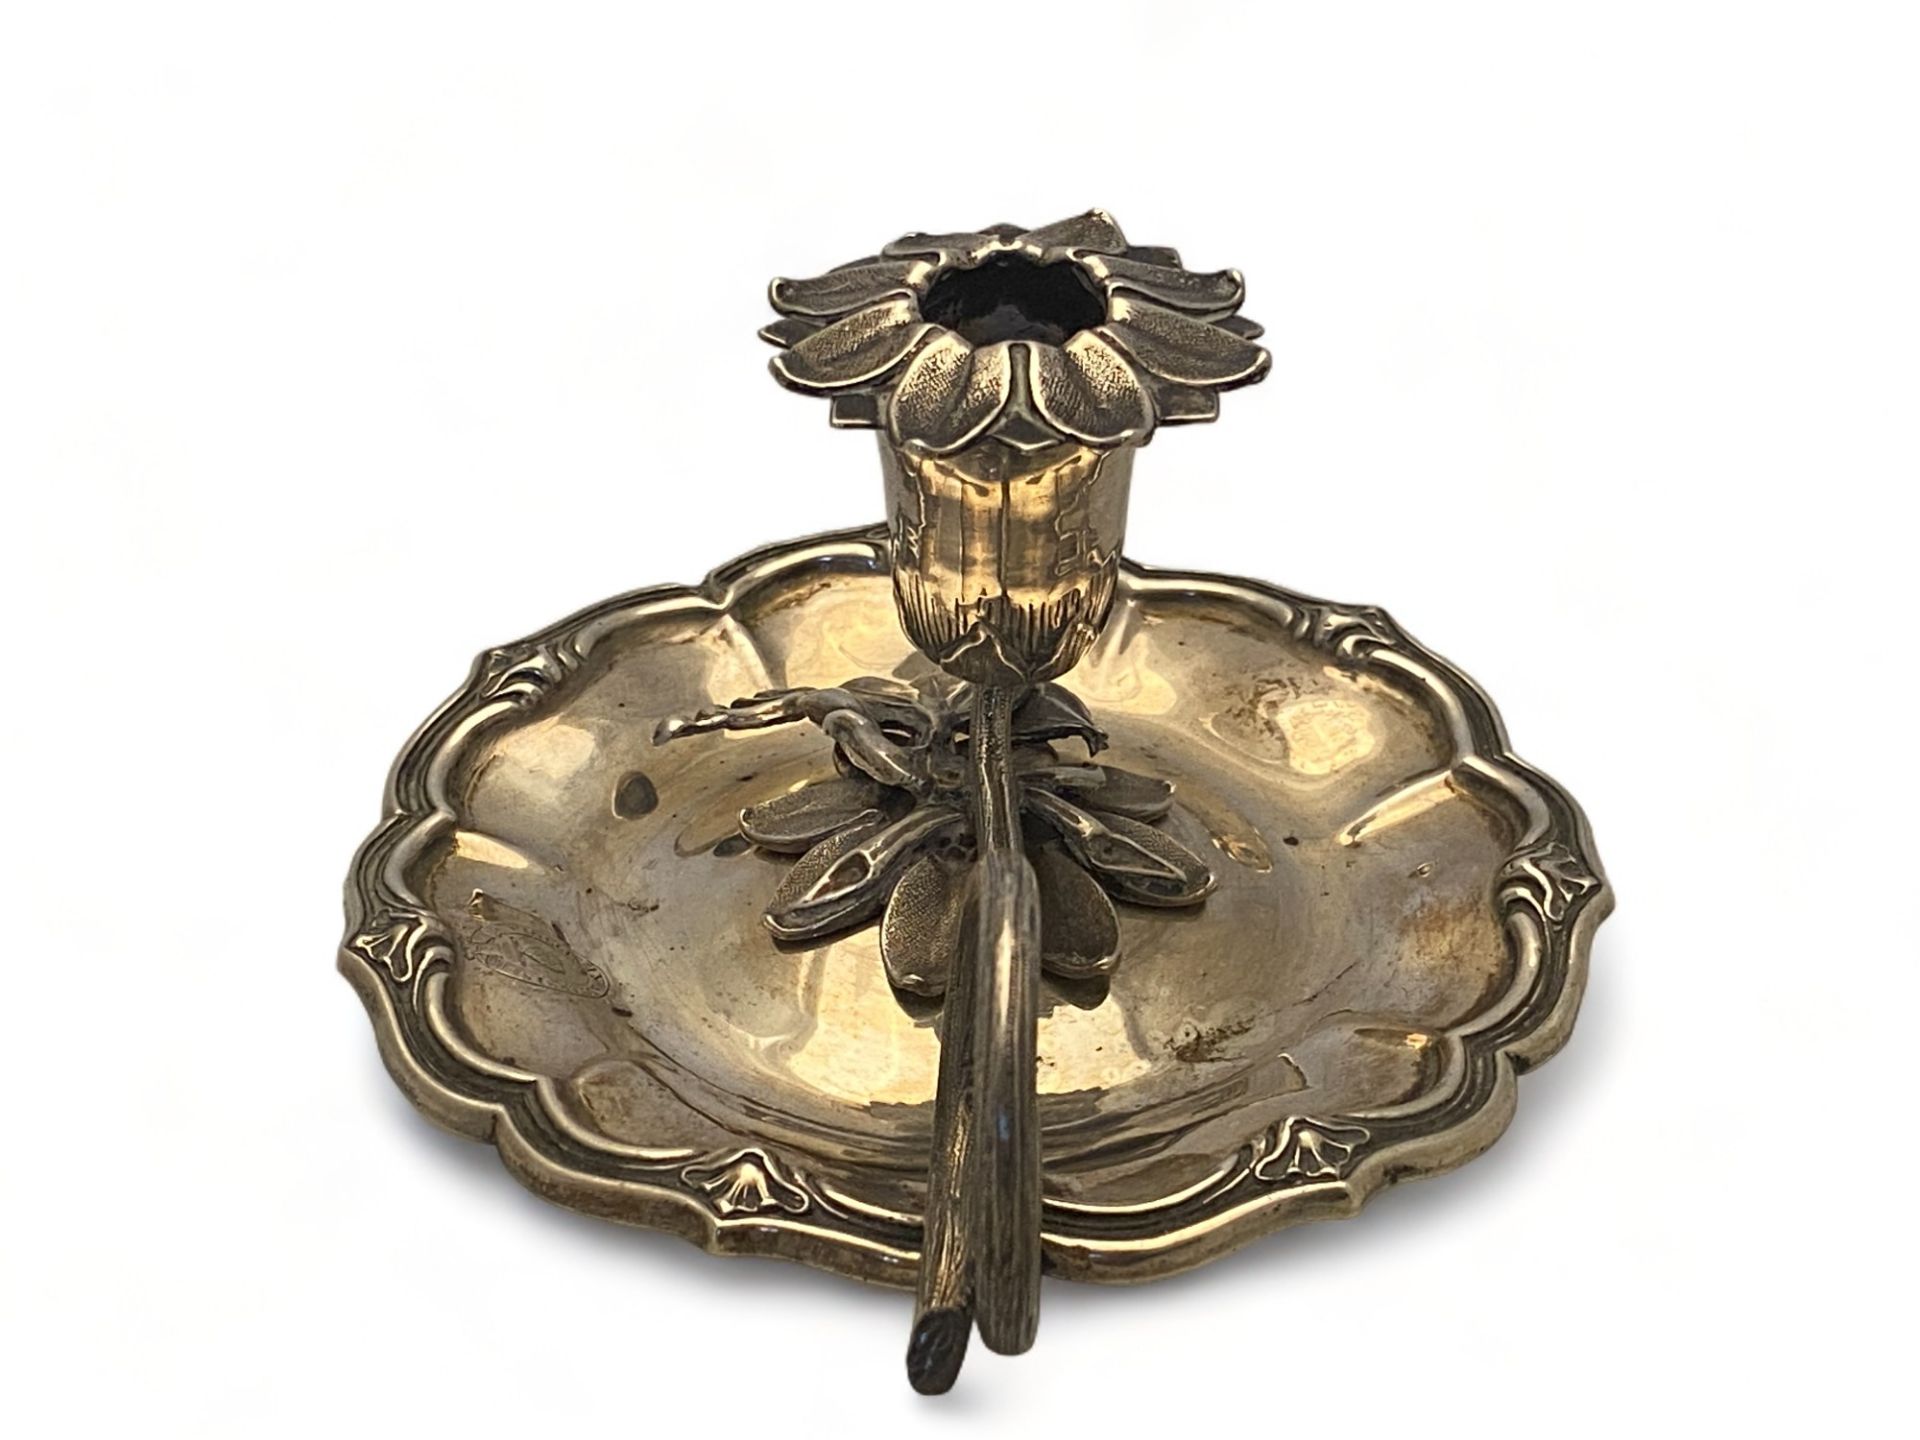 A William IV silver chamberstick with sconce cover, Charles Reily and George Storer, London, 1836 - Image 10 of 16